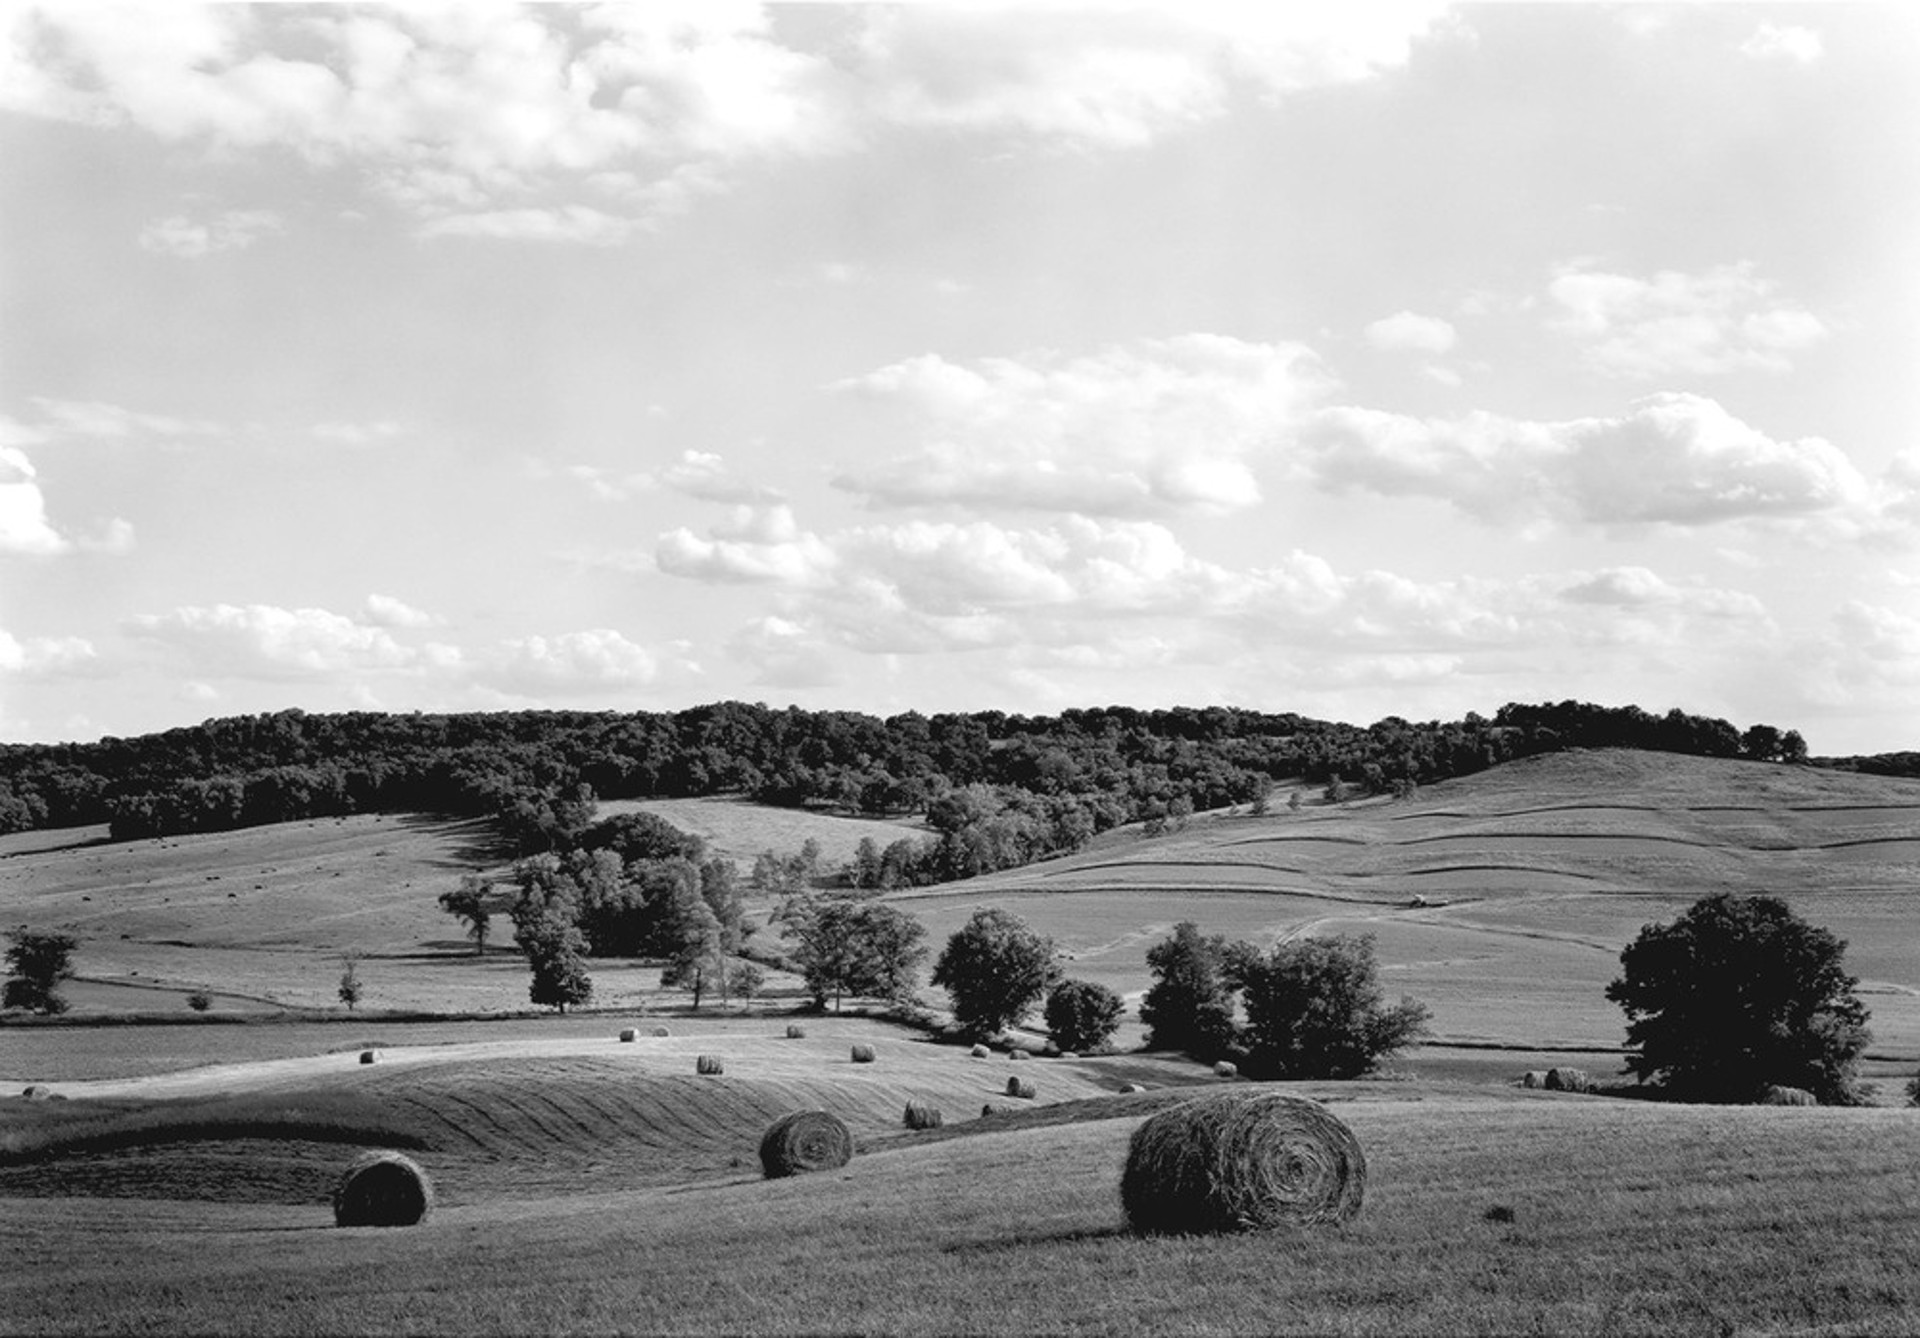 Landscape with Round Bales by Michael Johnson